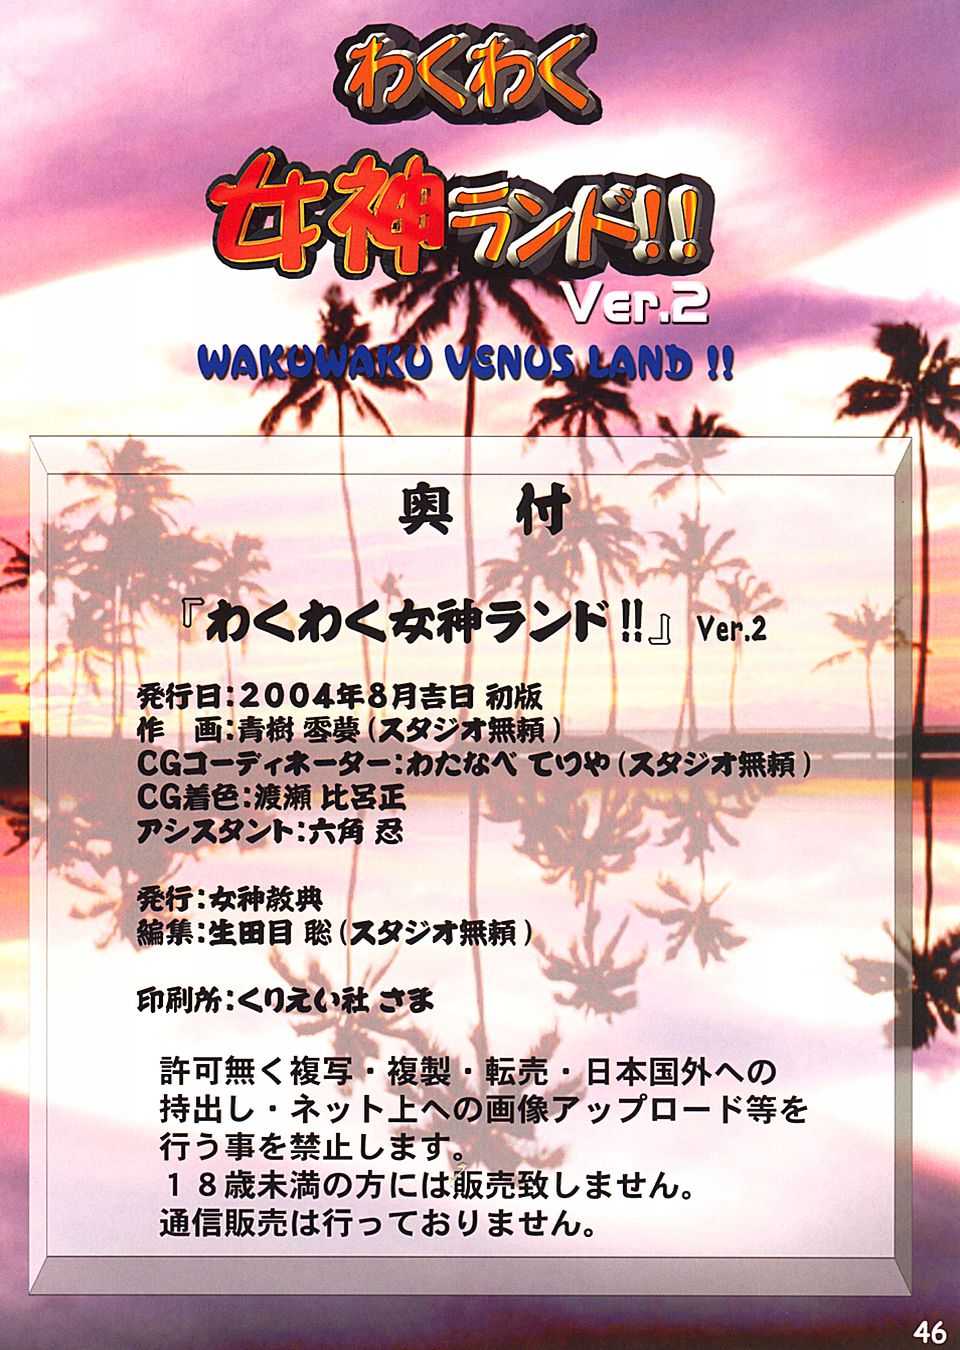 [Megami Kyouten] Waku Waku Venus Land Ver.2 (D.O.A. part only) (Dead or Alive) [English] [Chocolate] 